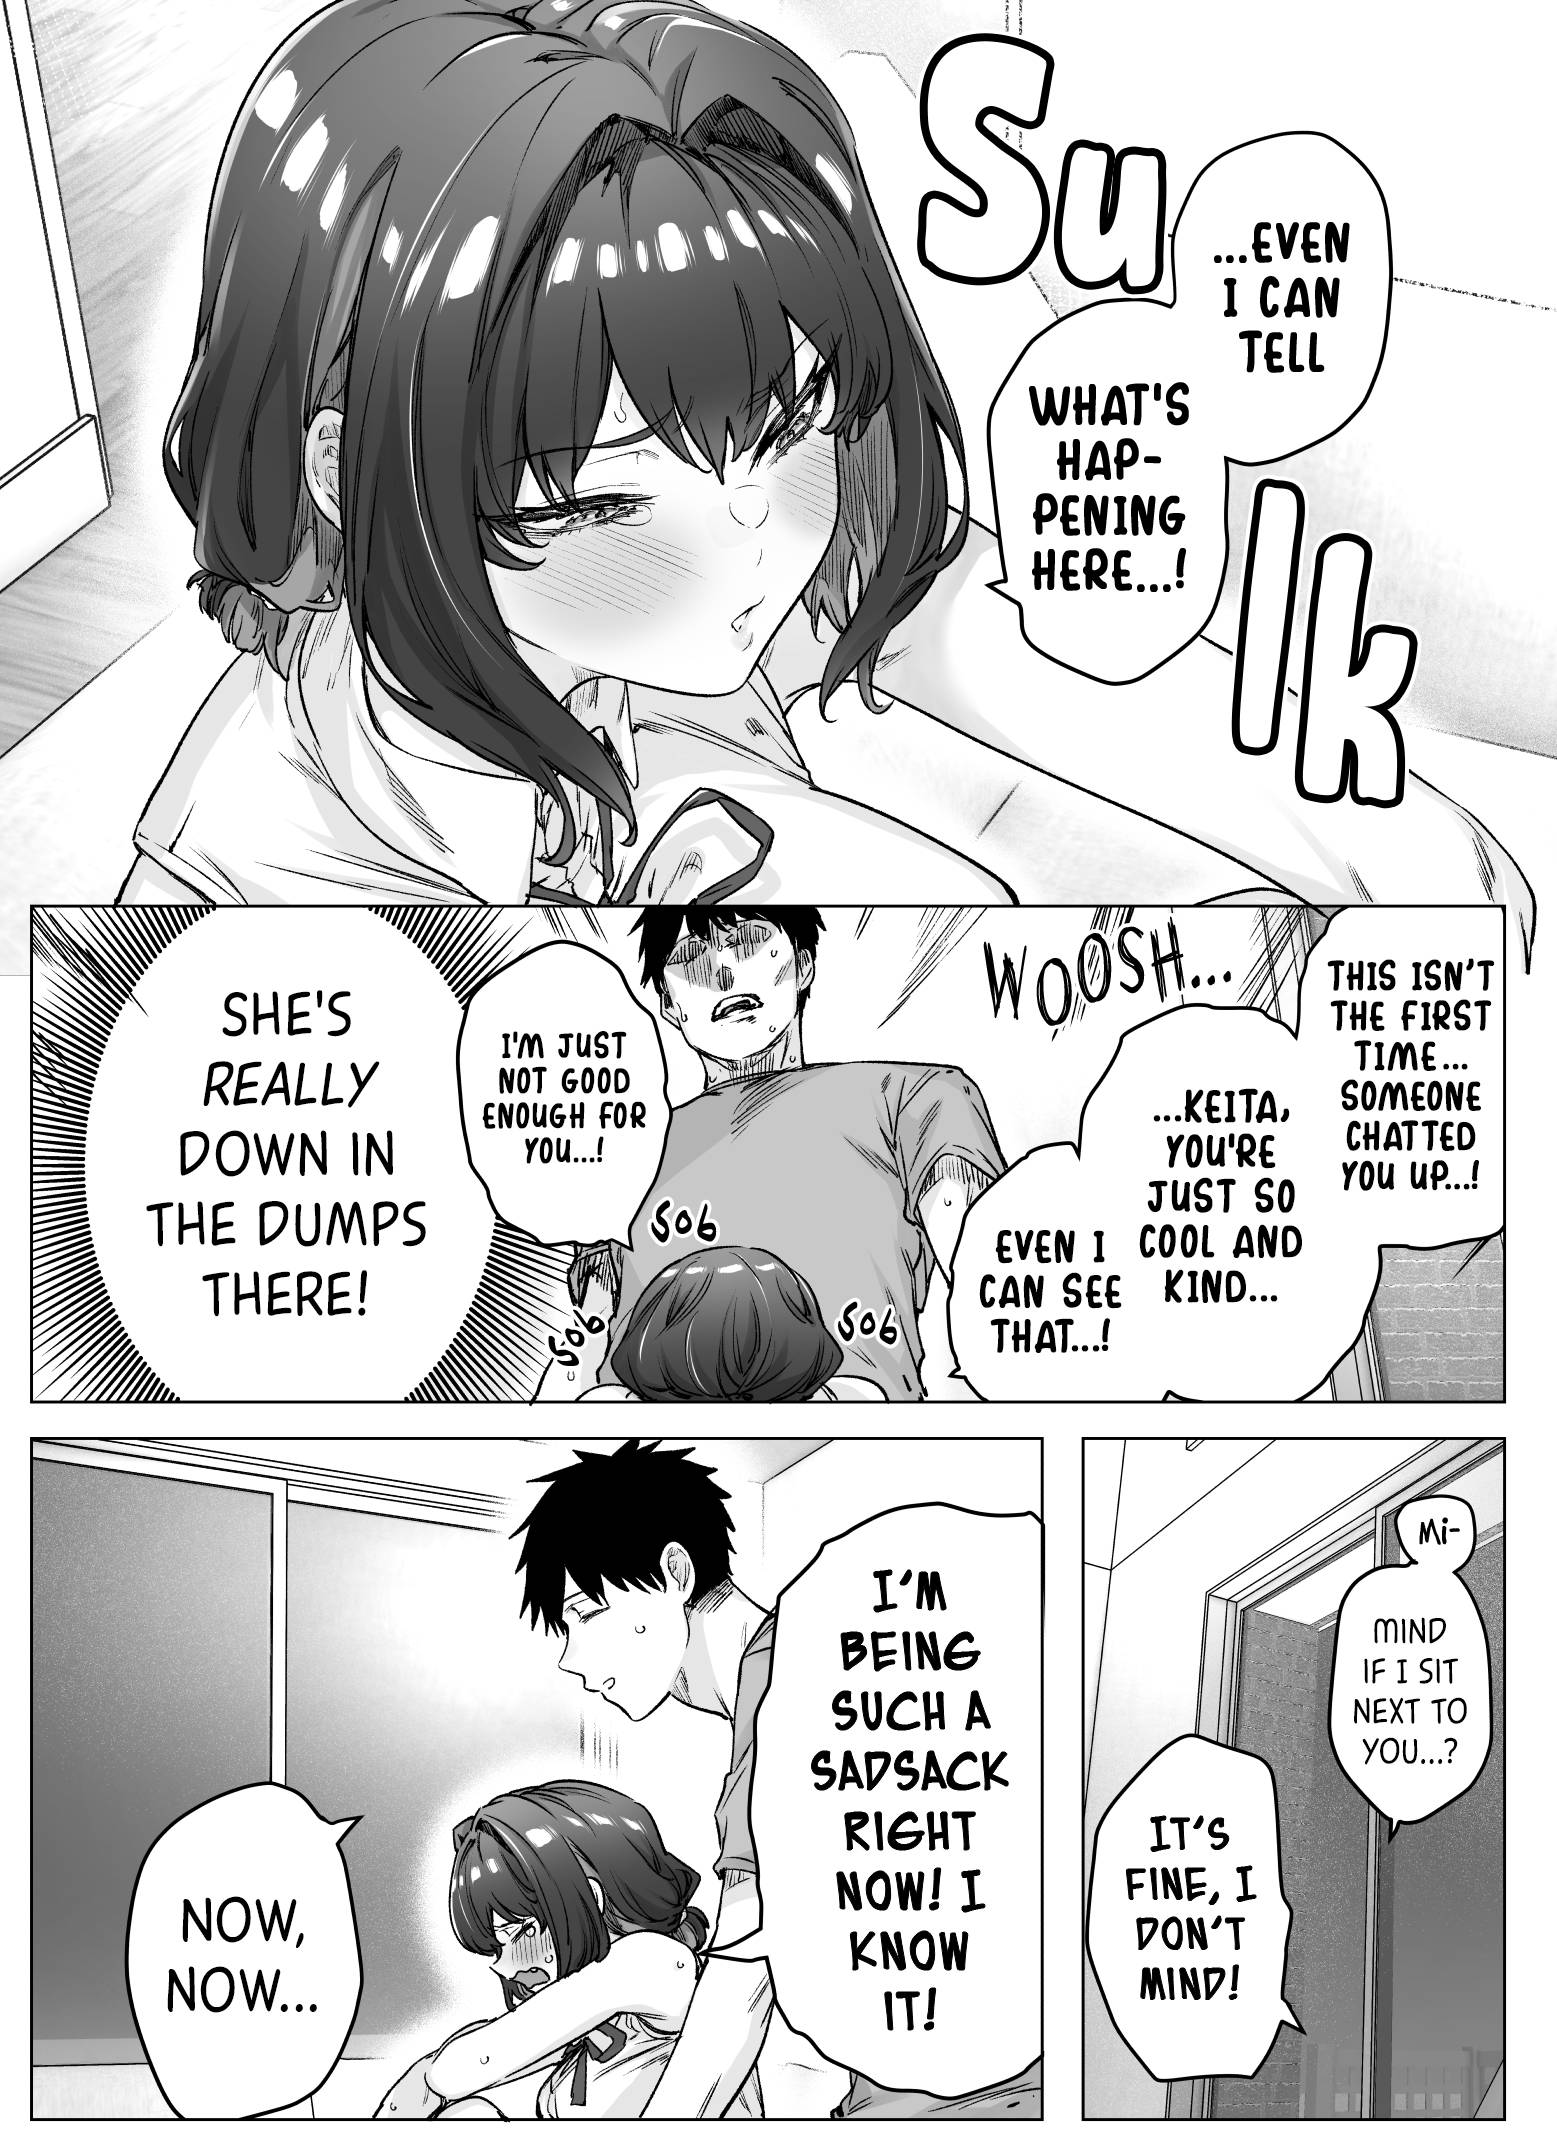 The Tsuntsuntsuntsuntsuntsuntsuntsuntsuntsuntsundere Girl Getting Less and Less Tsun Day by Day - chapter 87 - #1